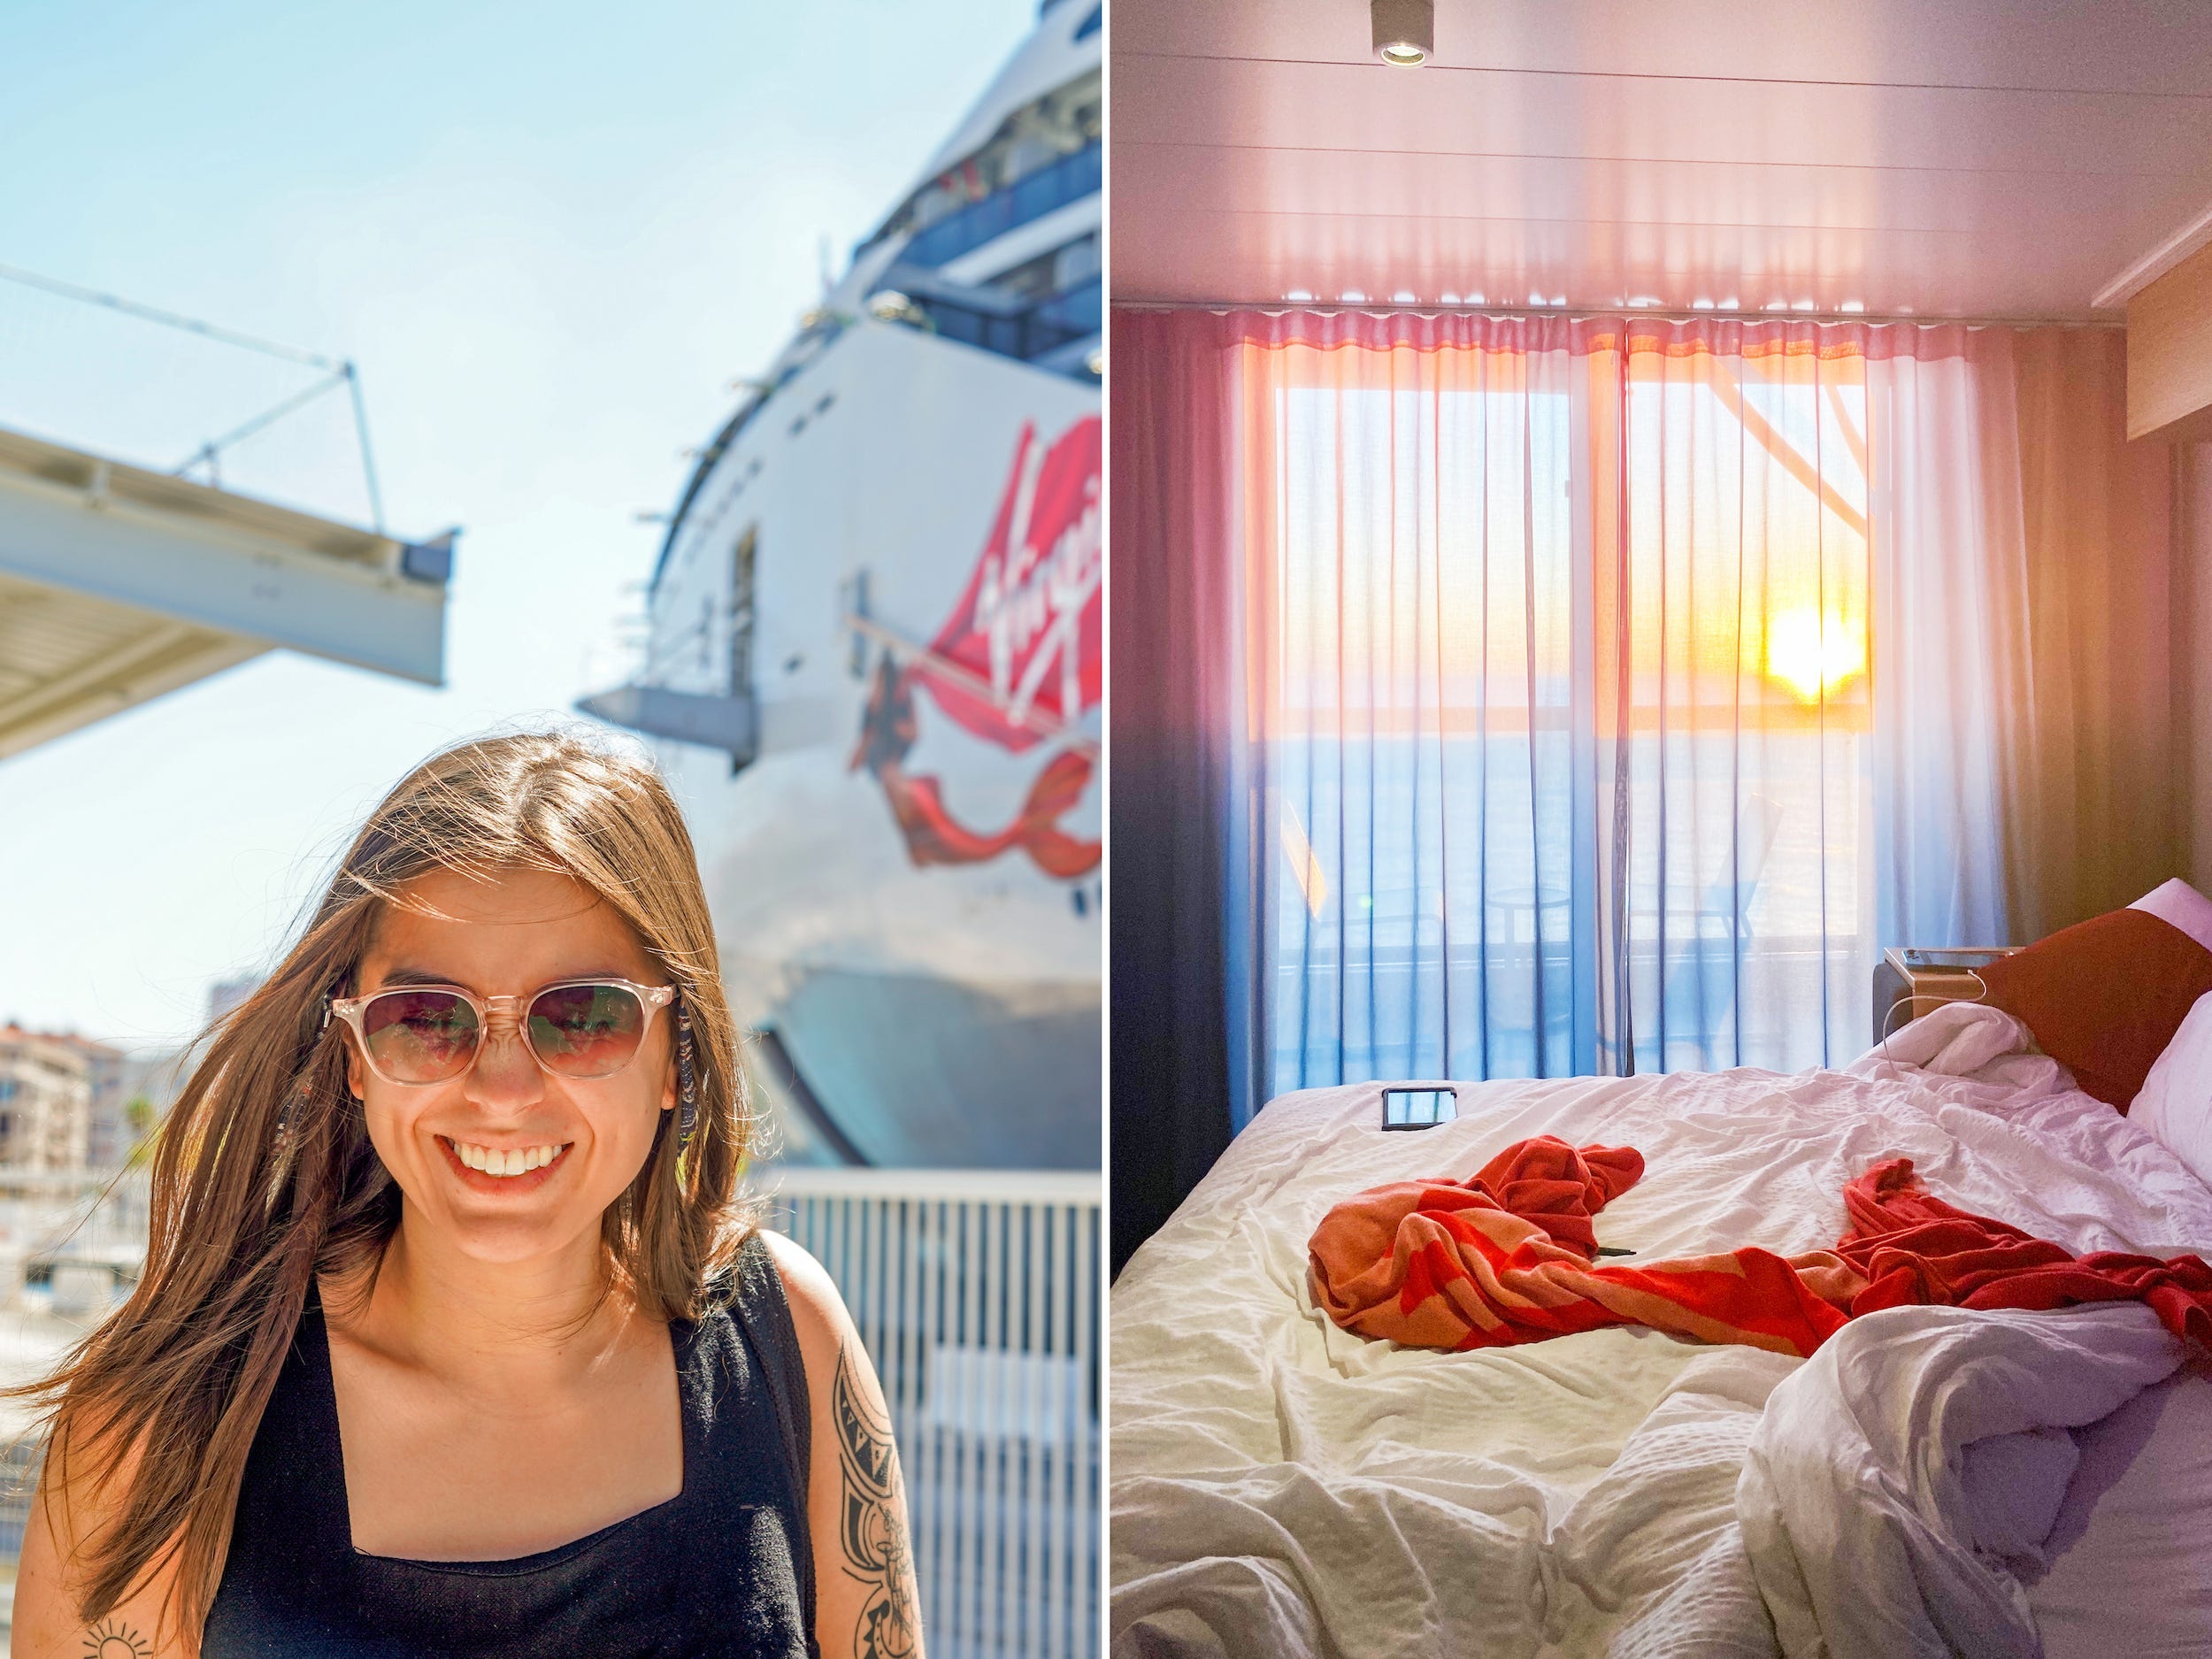 <ul class="summary-list"> <li>On a recent Virgin Voyages cruise, I booked a 225-square-foot sea terrace room.</li> <li>Starting at $844 a night, the room has a balcony and a queen-sized bed that transforms into a couch.</li> <li>With a rainfall shower and smart controls for mood lighting and entertainment, it felt luxurious.</li> </ul><div class="read-original">Read the original article on <a href="https://www.insider.com/virgin-voyages-sea-terrace-room-balcony-photo-cruise-cabin-tour-2023-8">Insider</a></div>